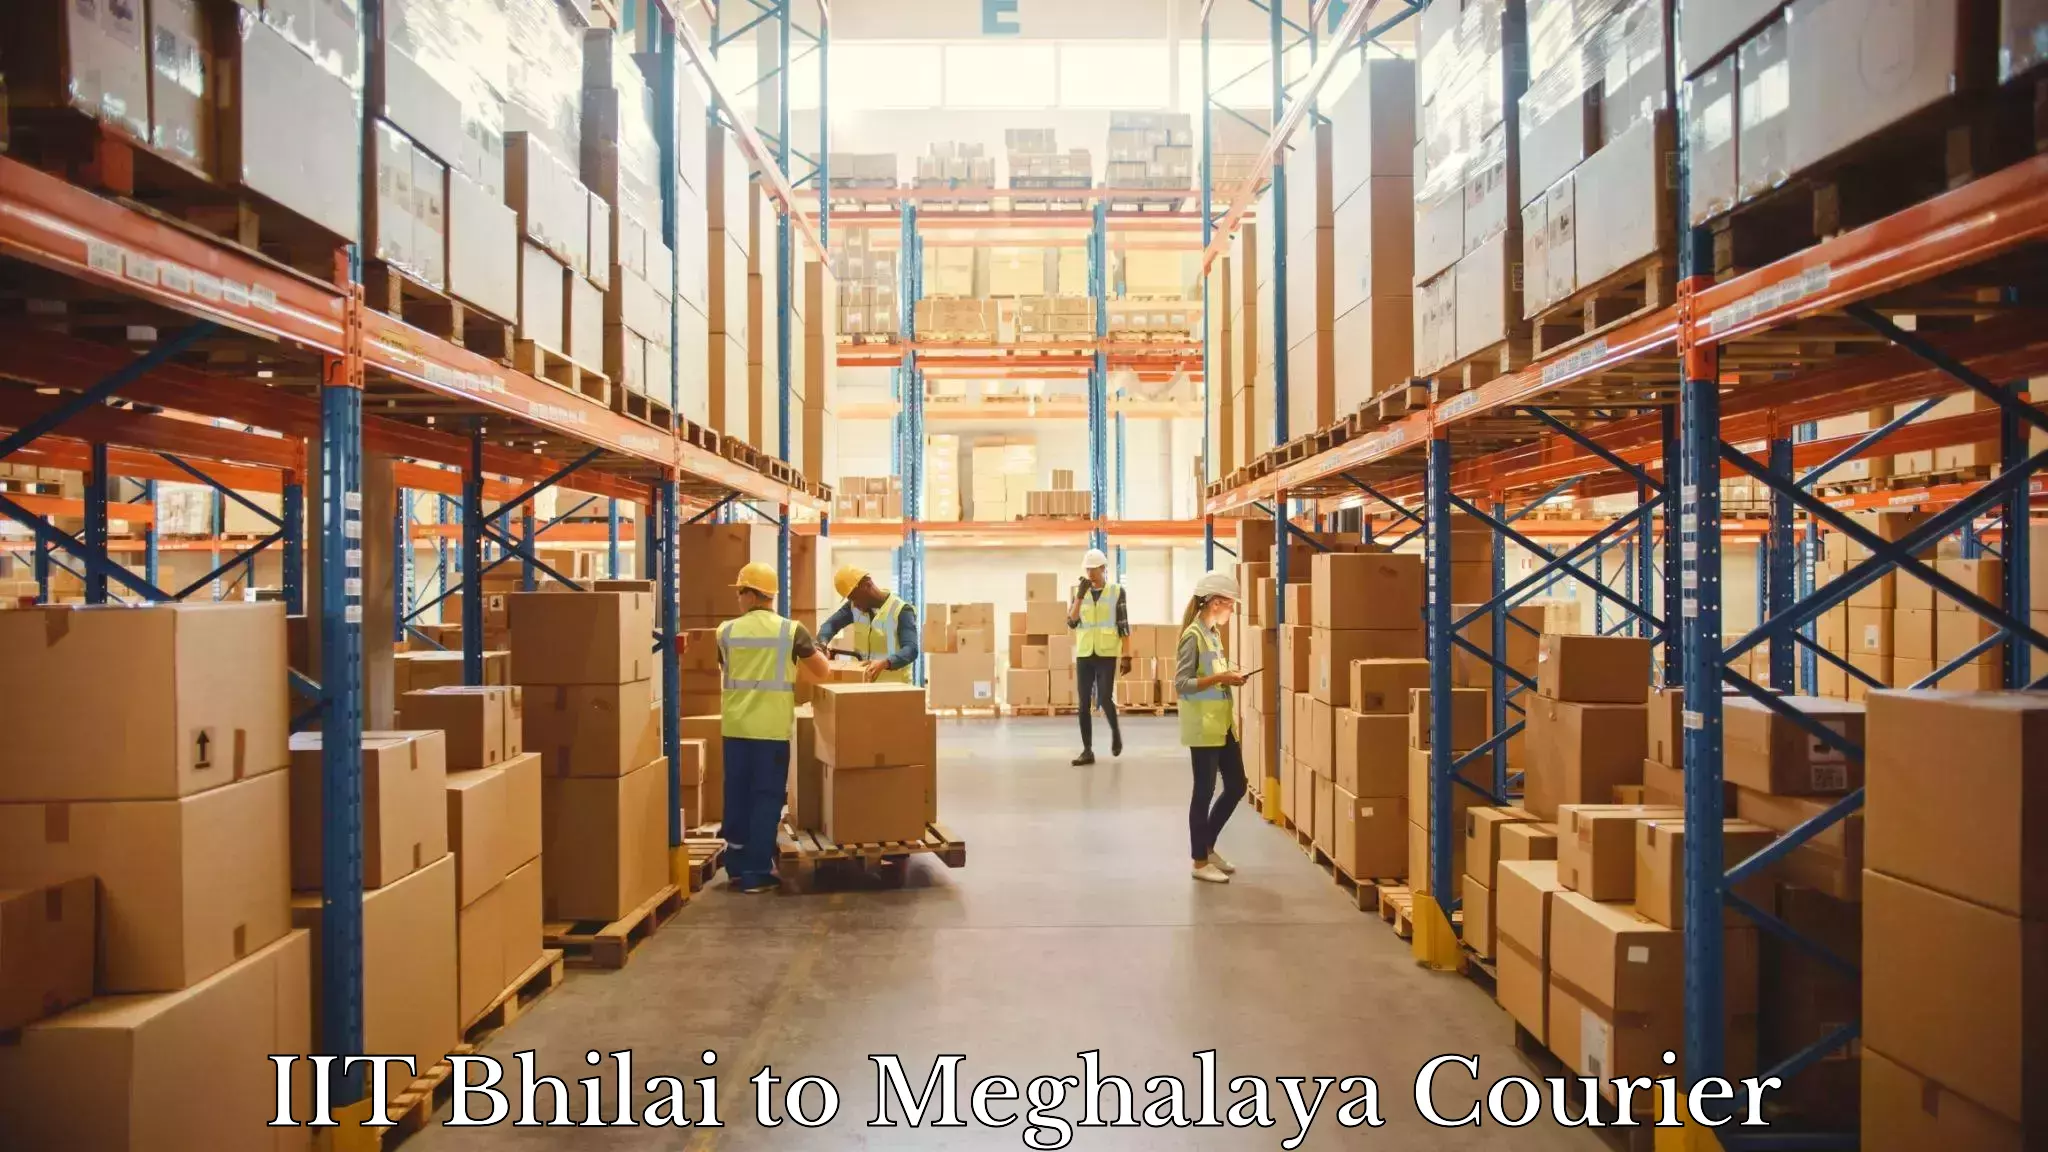 Reliable courier services IIT Bhilai to Shillong